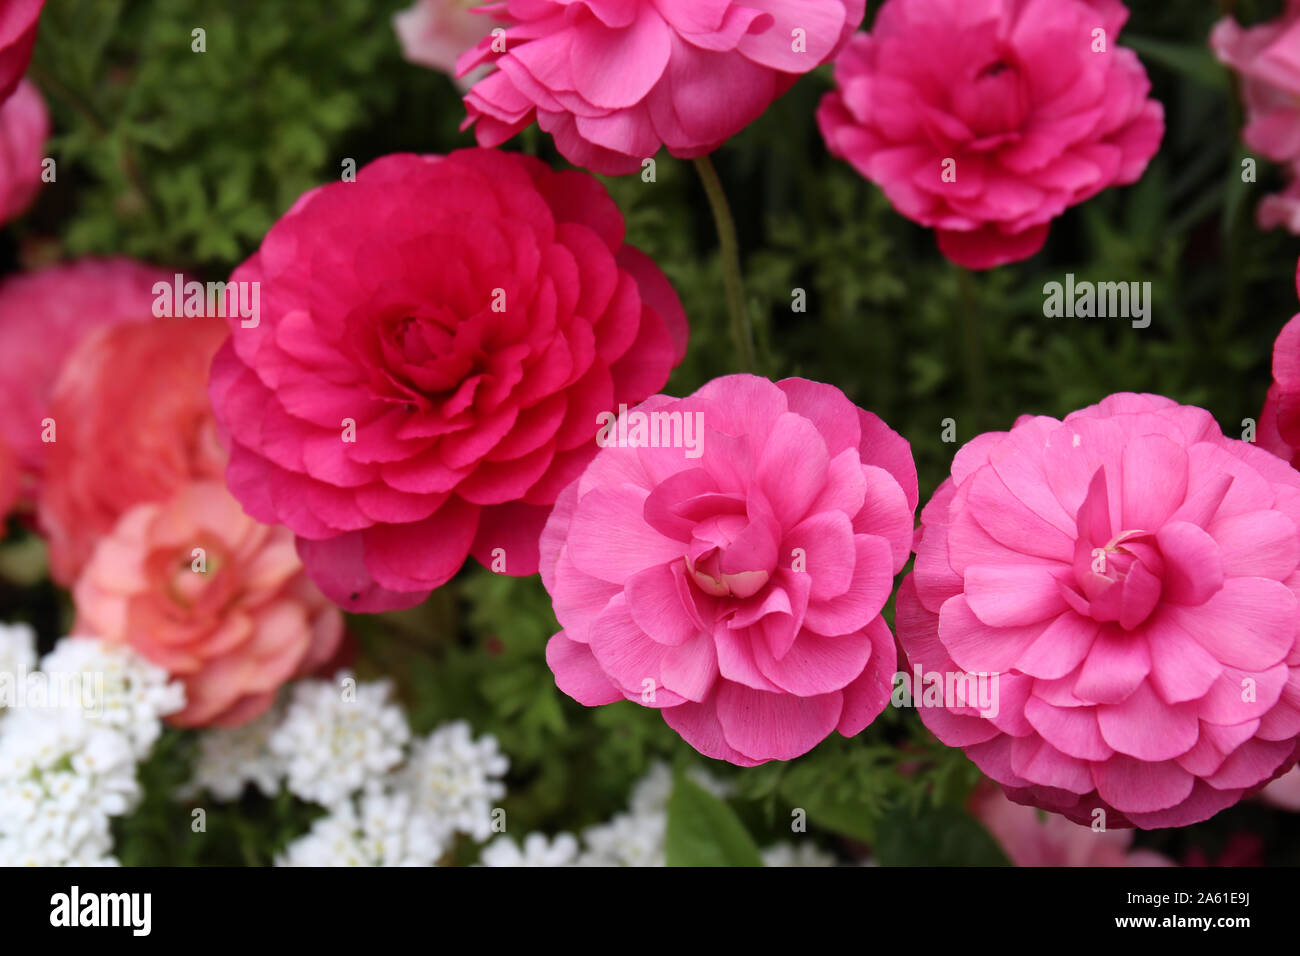 A beautiful flower bed filled with pink and peach Ranunculus and white Candytuft flowers in full bloom Stock Photo